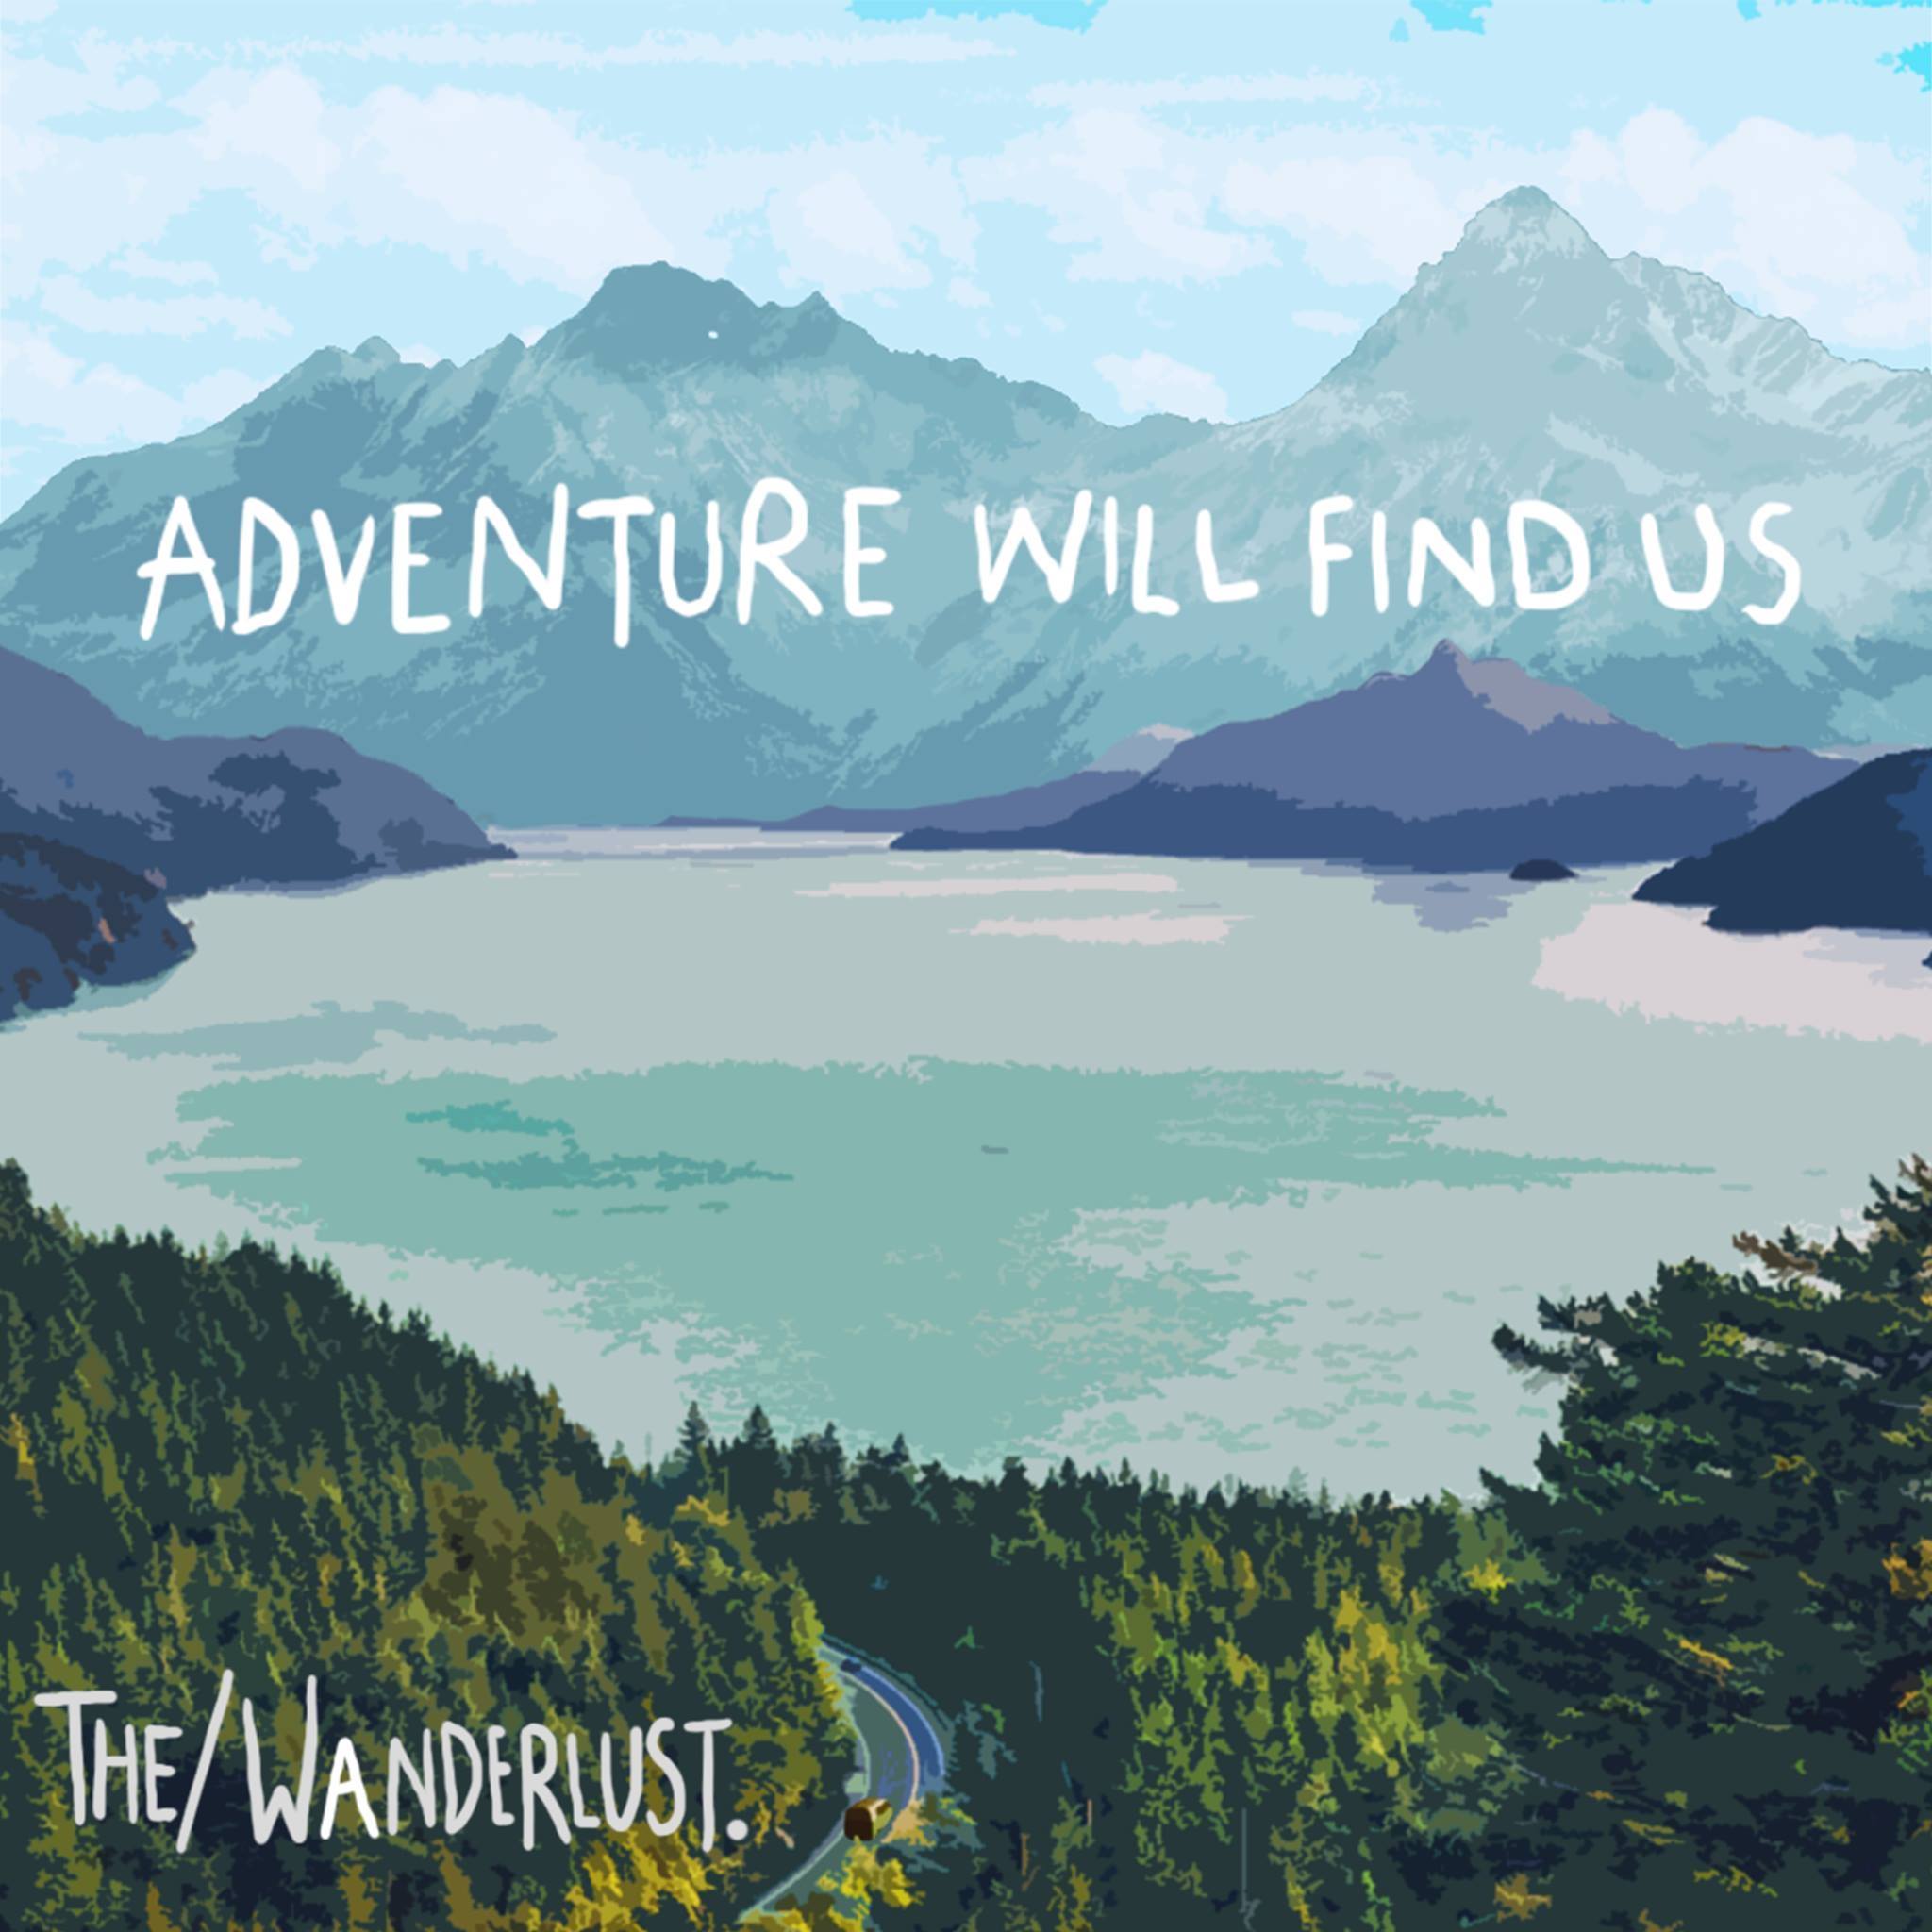 The/Wanderlust. – “Moving Mountains”